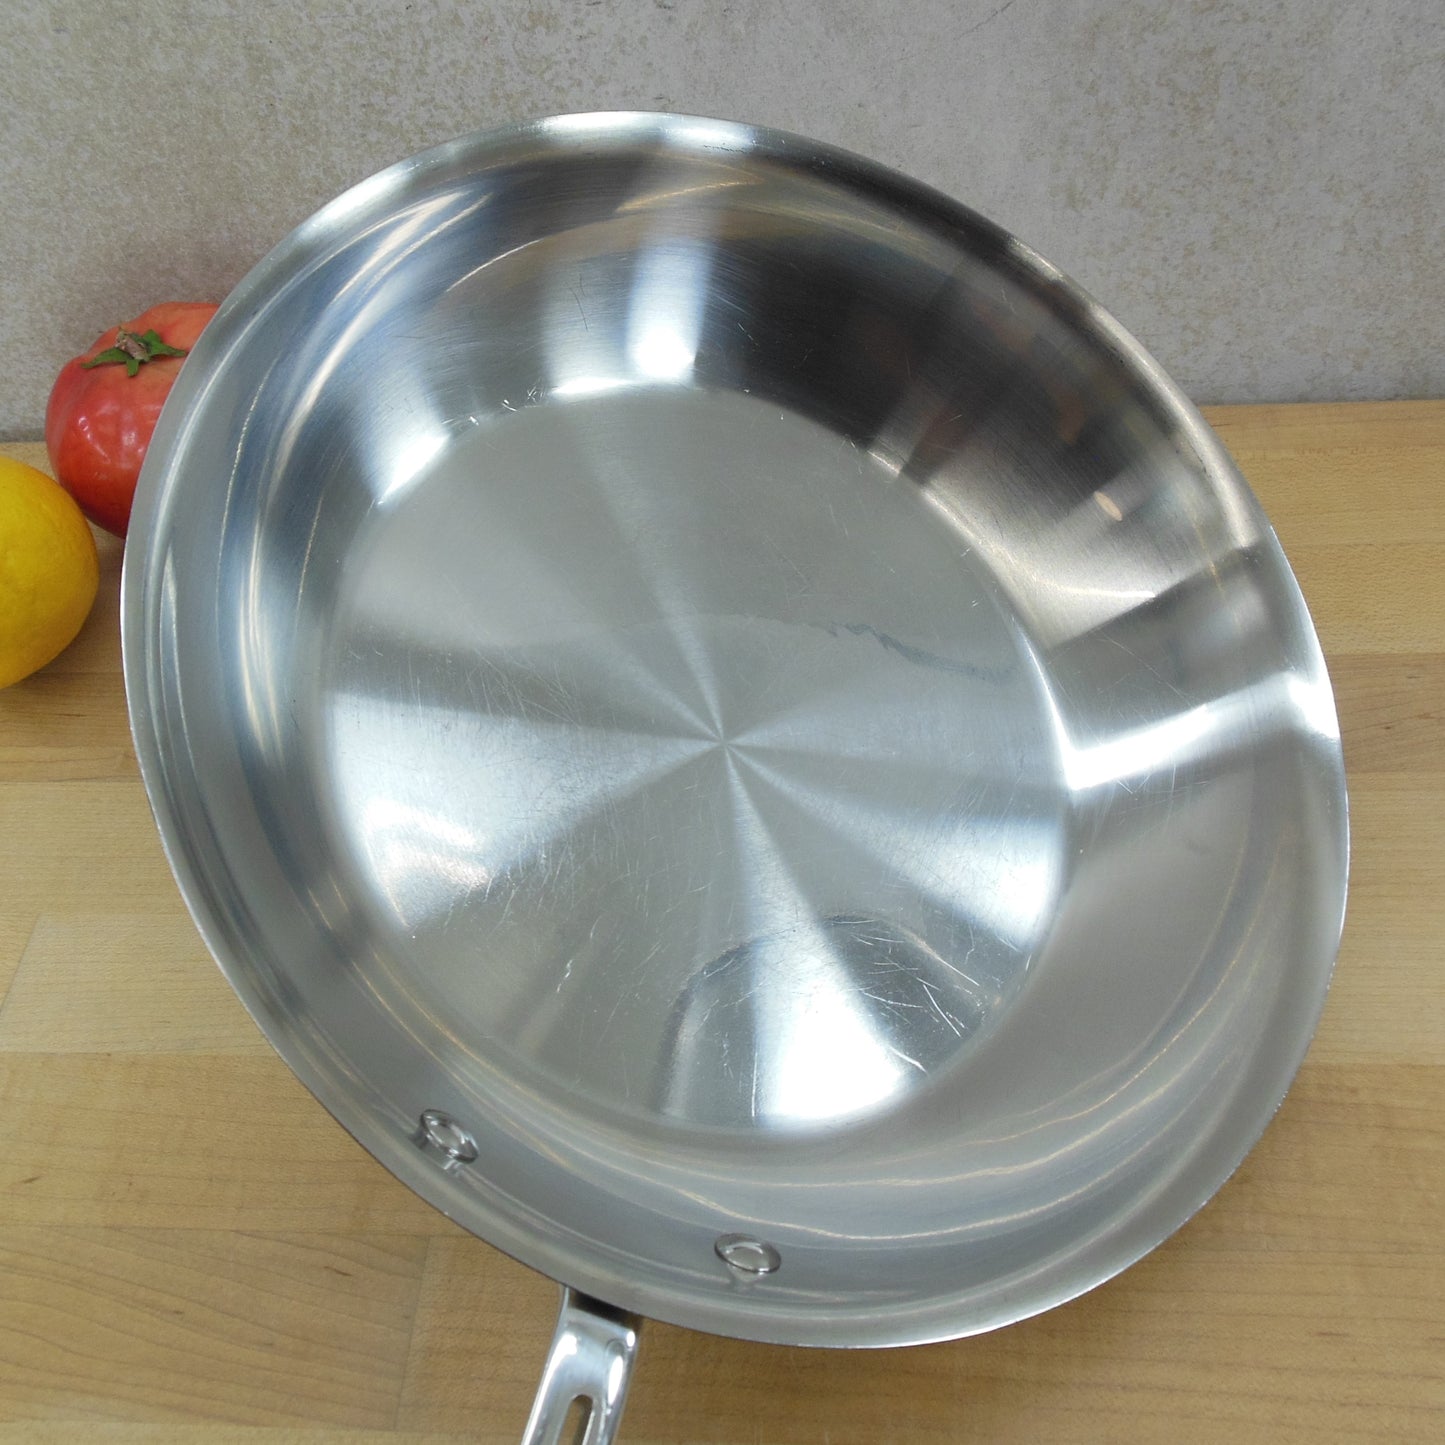 Emeril By All-Clad Stainless Copper Core 10" Skillet Fry Pan used